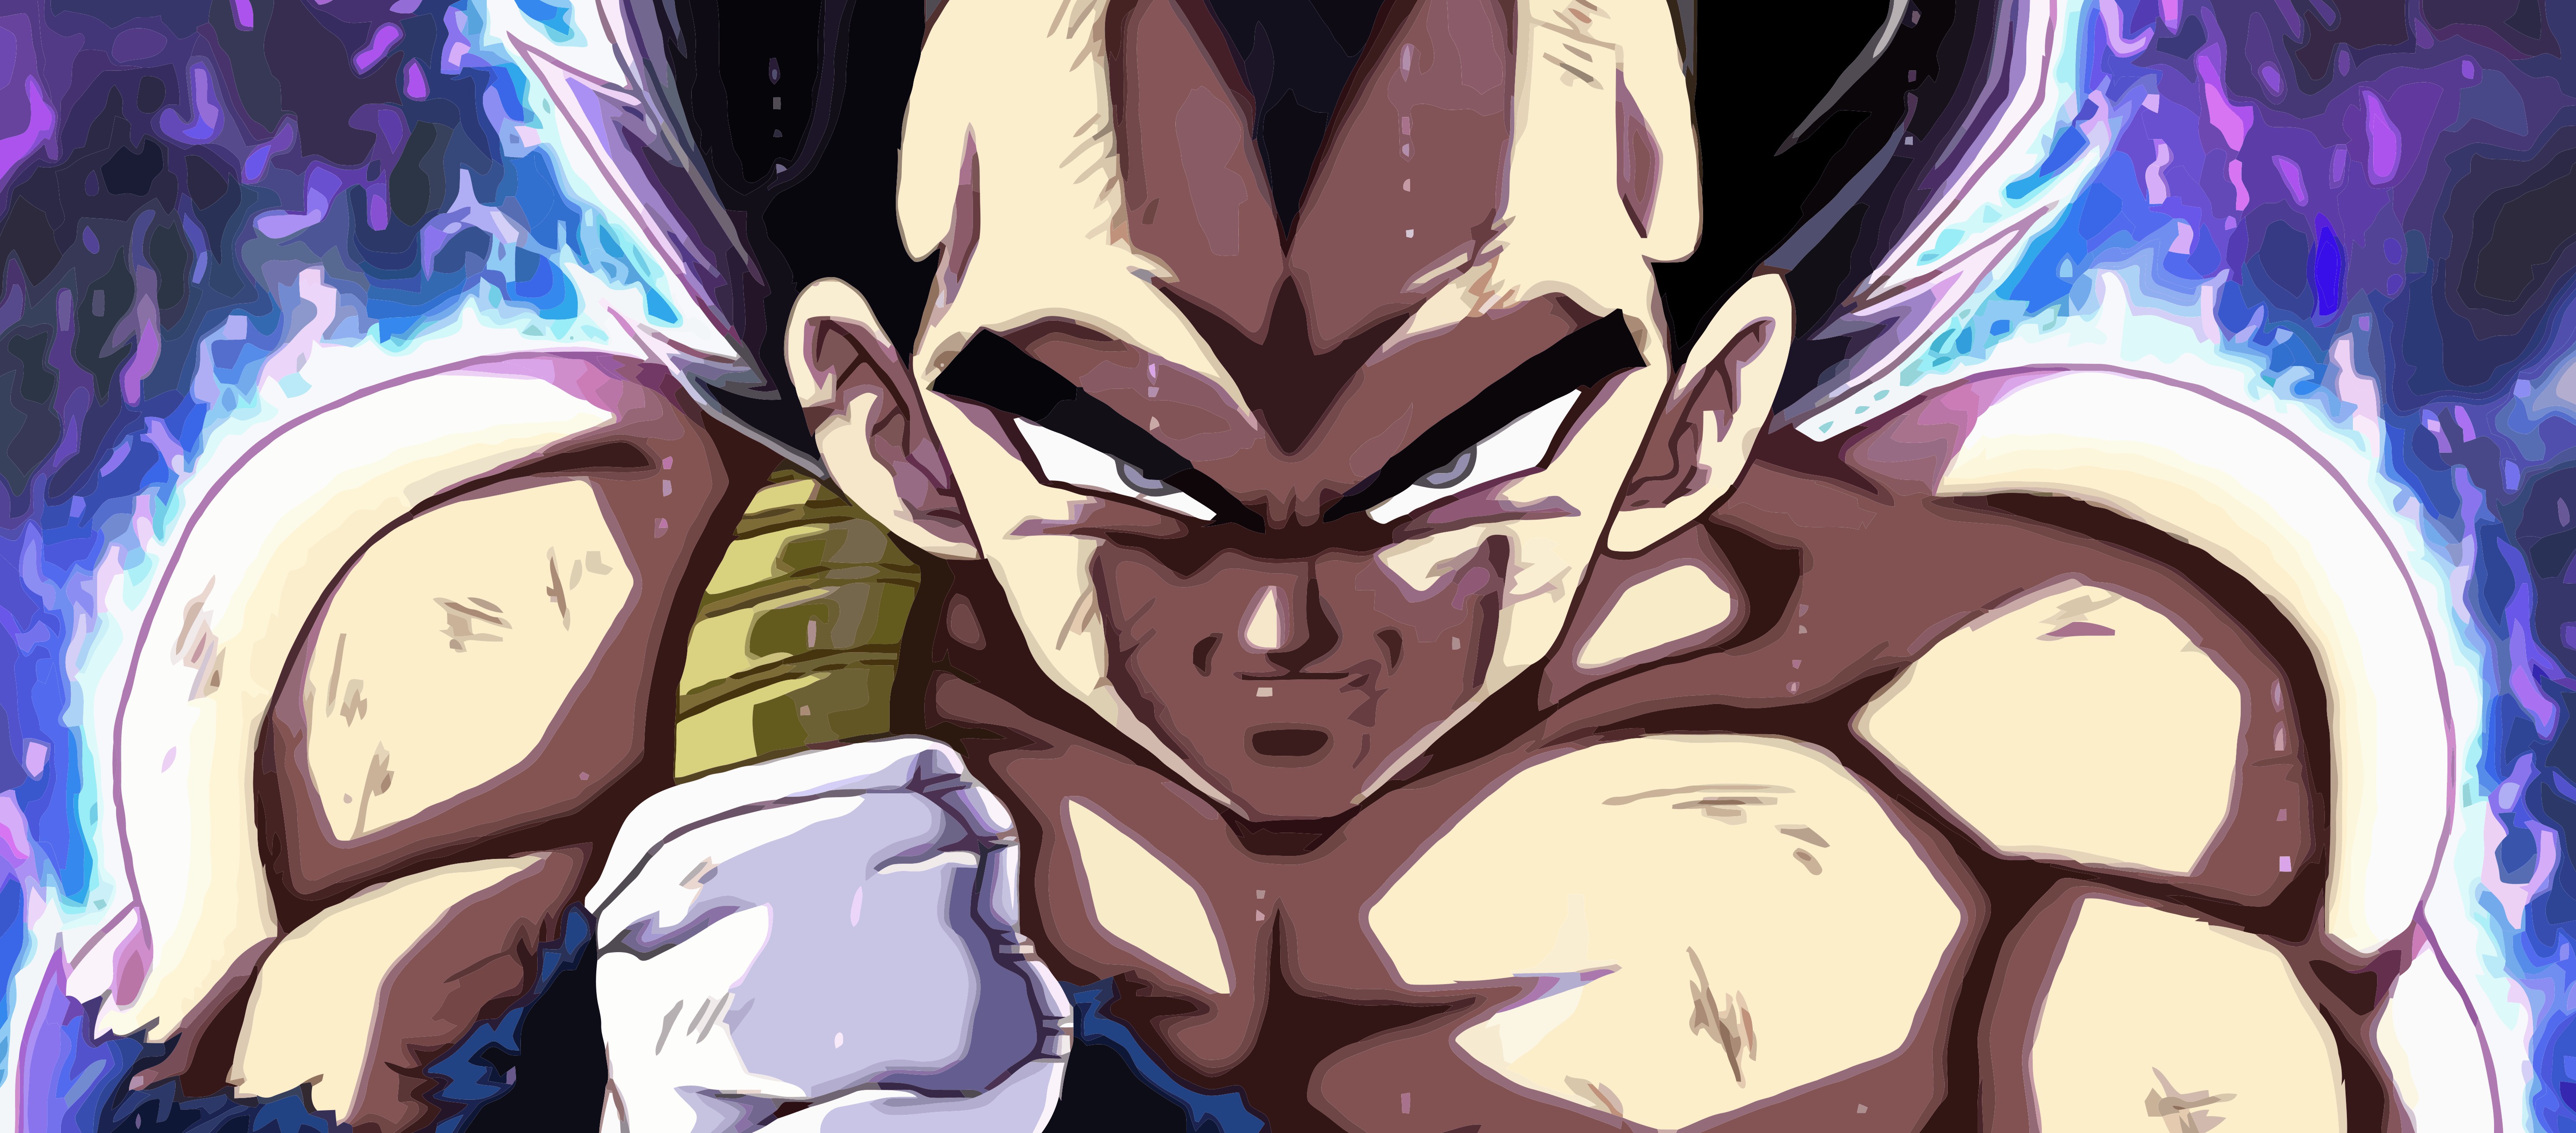 Free download Made a vector image out of Ultra Instinct Vegeta dbz